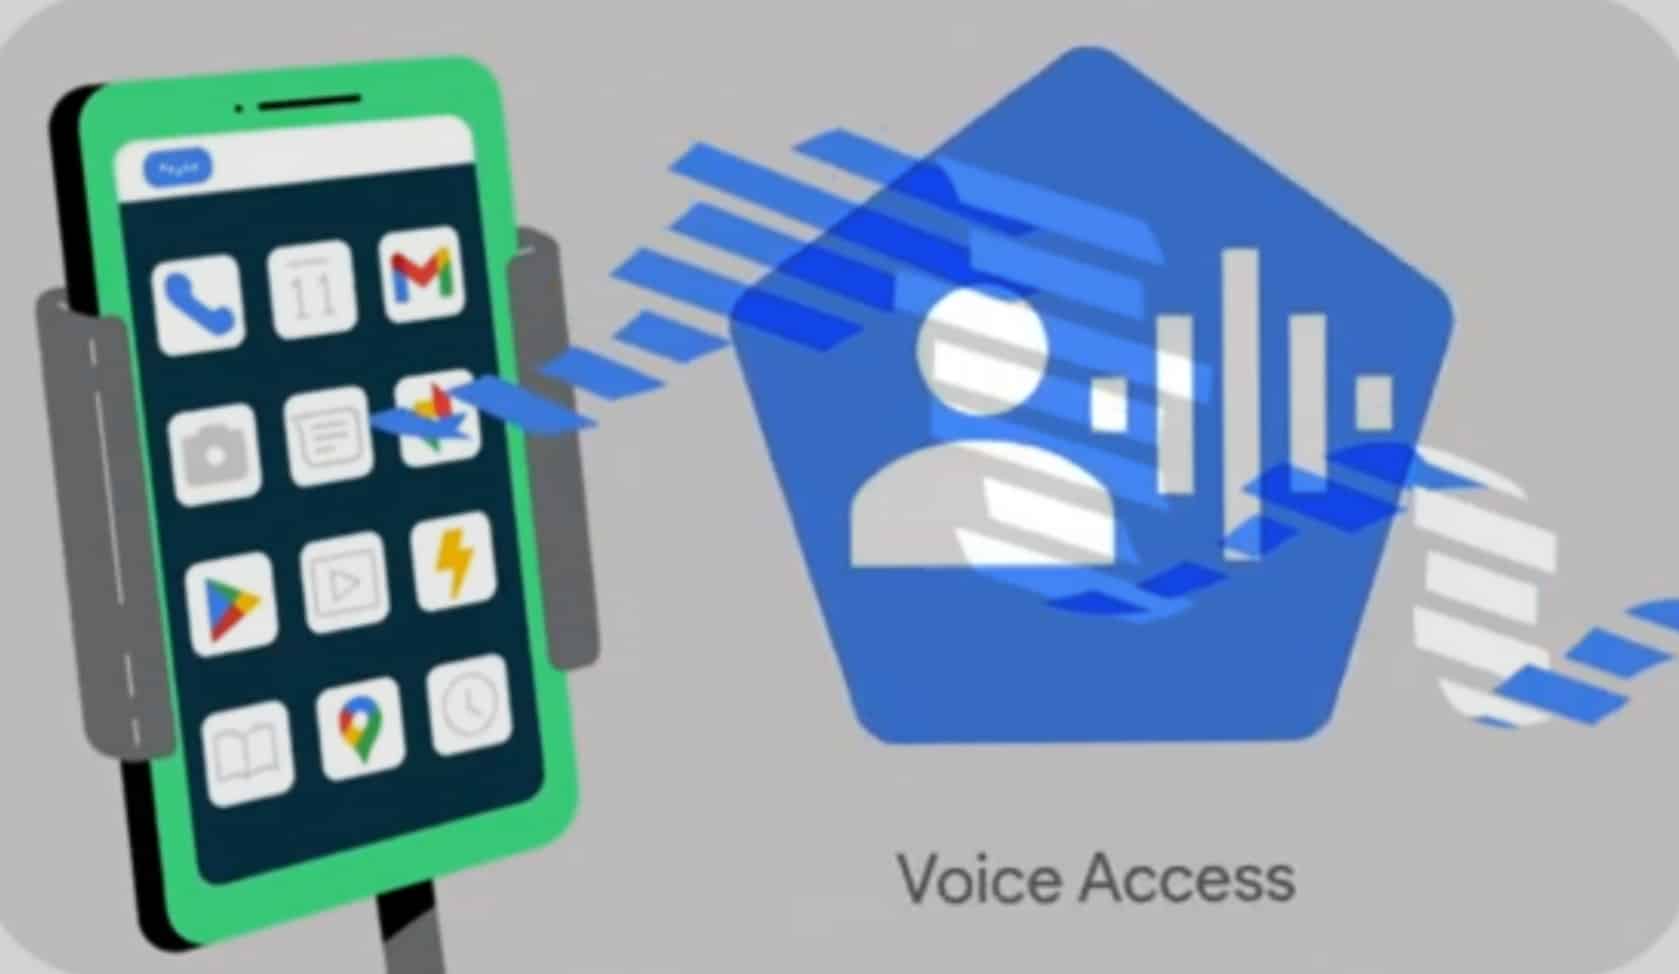 Google Expands The Improved Voice Access App to Older Android Smartphones